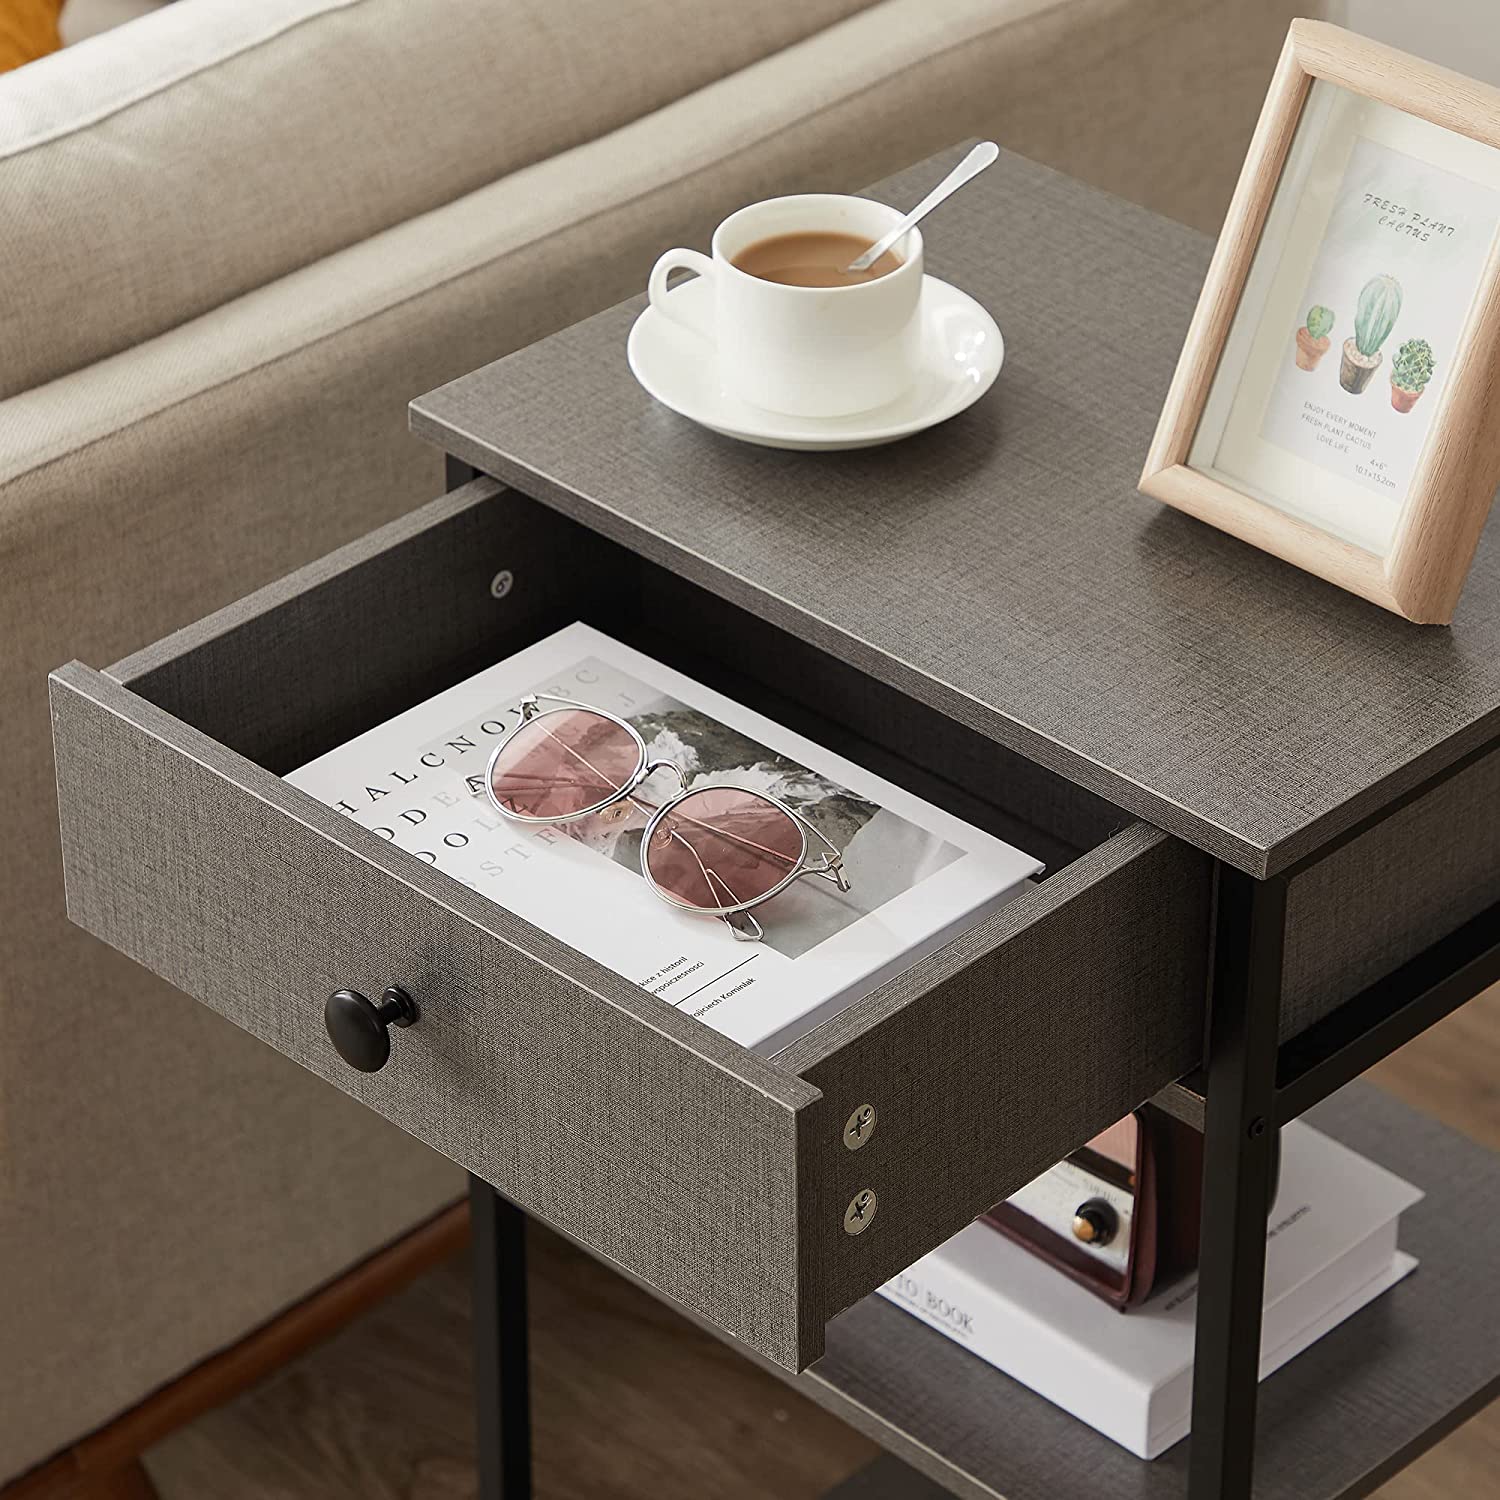 VECELO 27.5" Tall End Tables, Nightstands